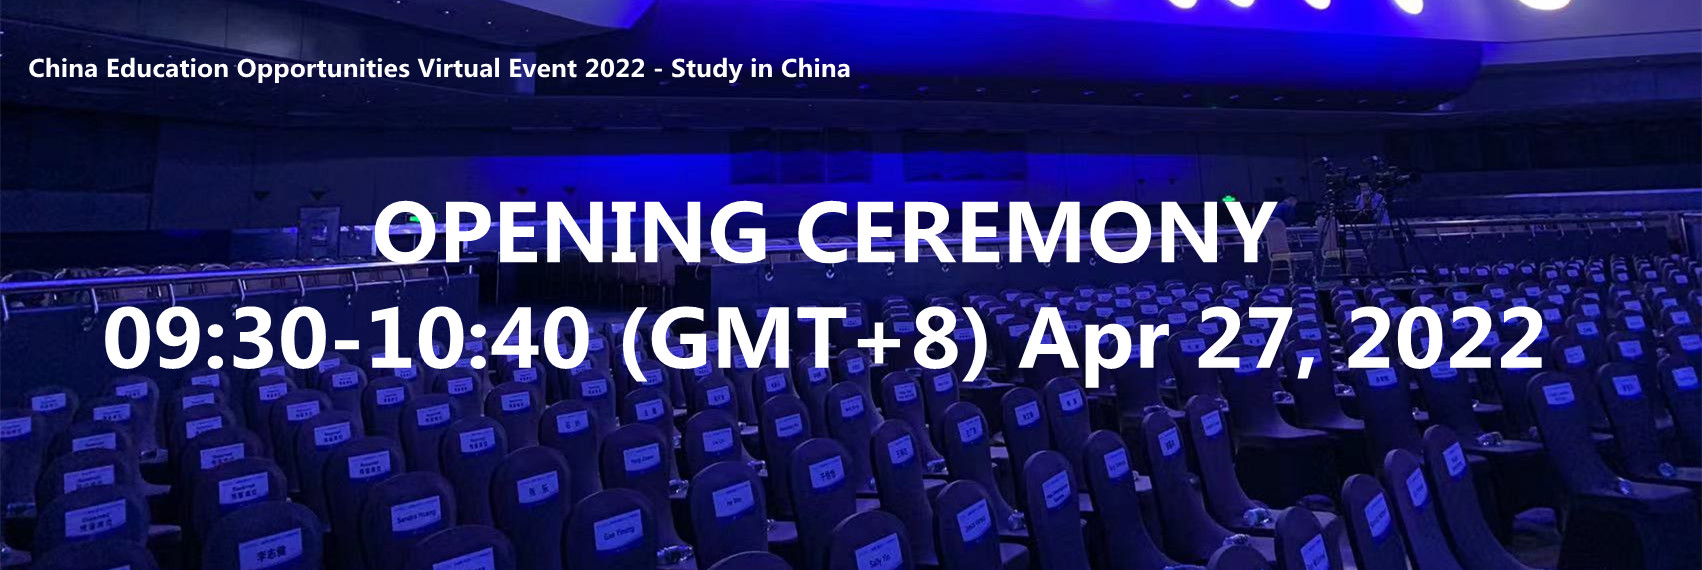 2022 Virtual Event Opening Ceremony